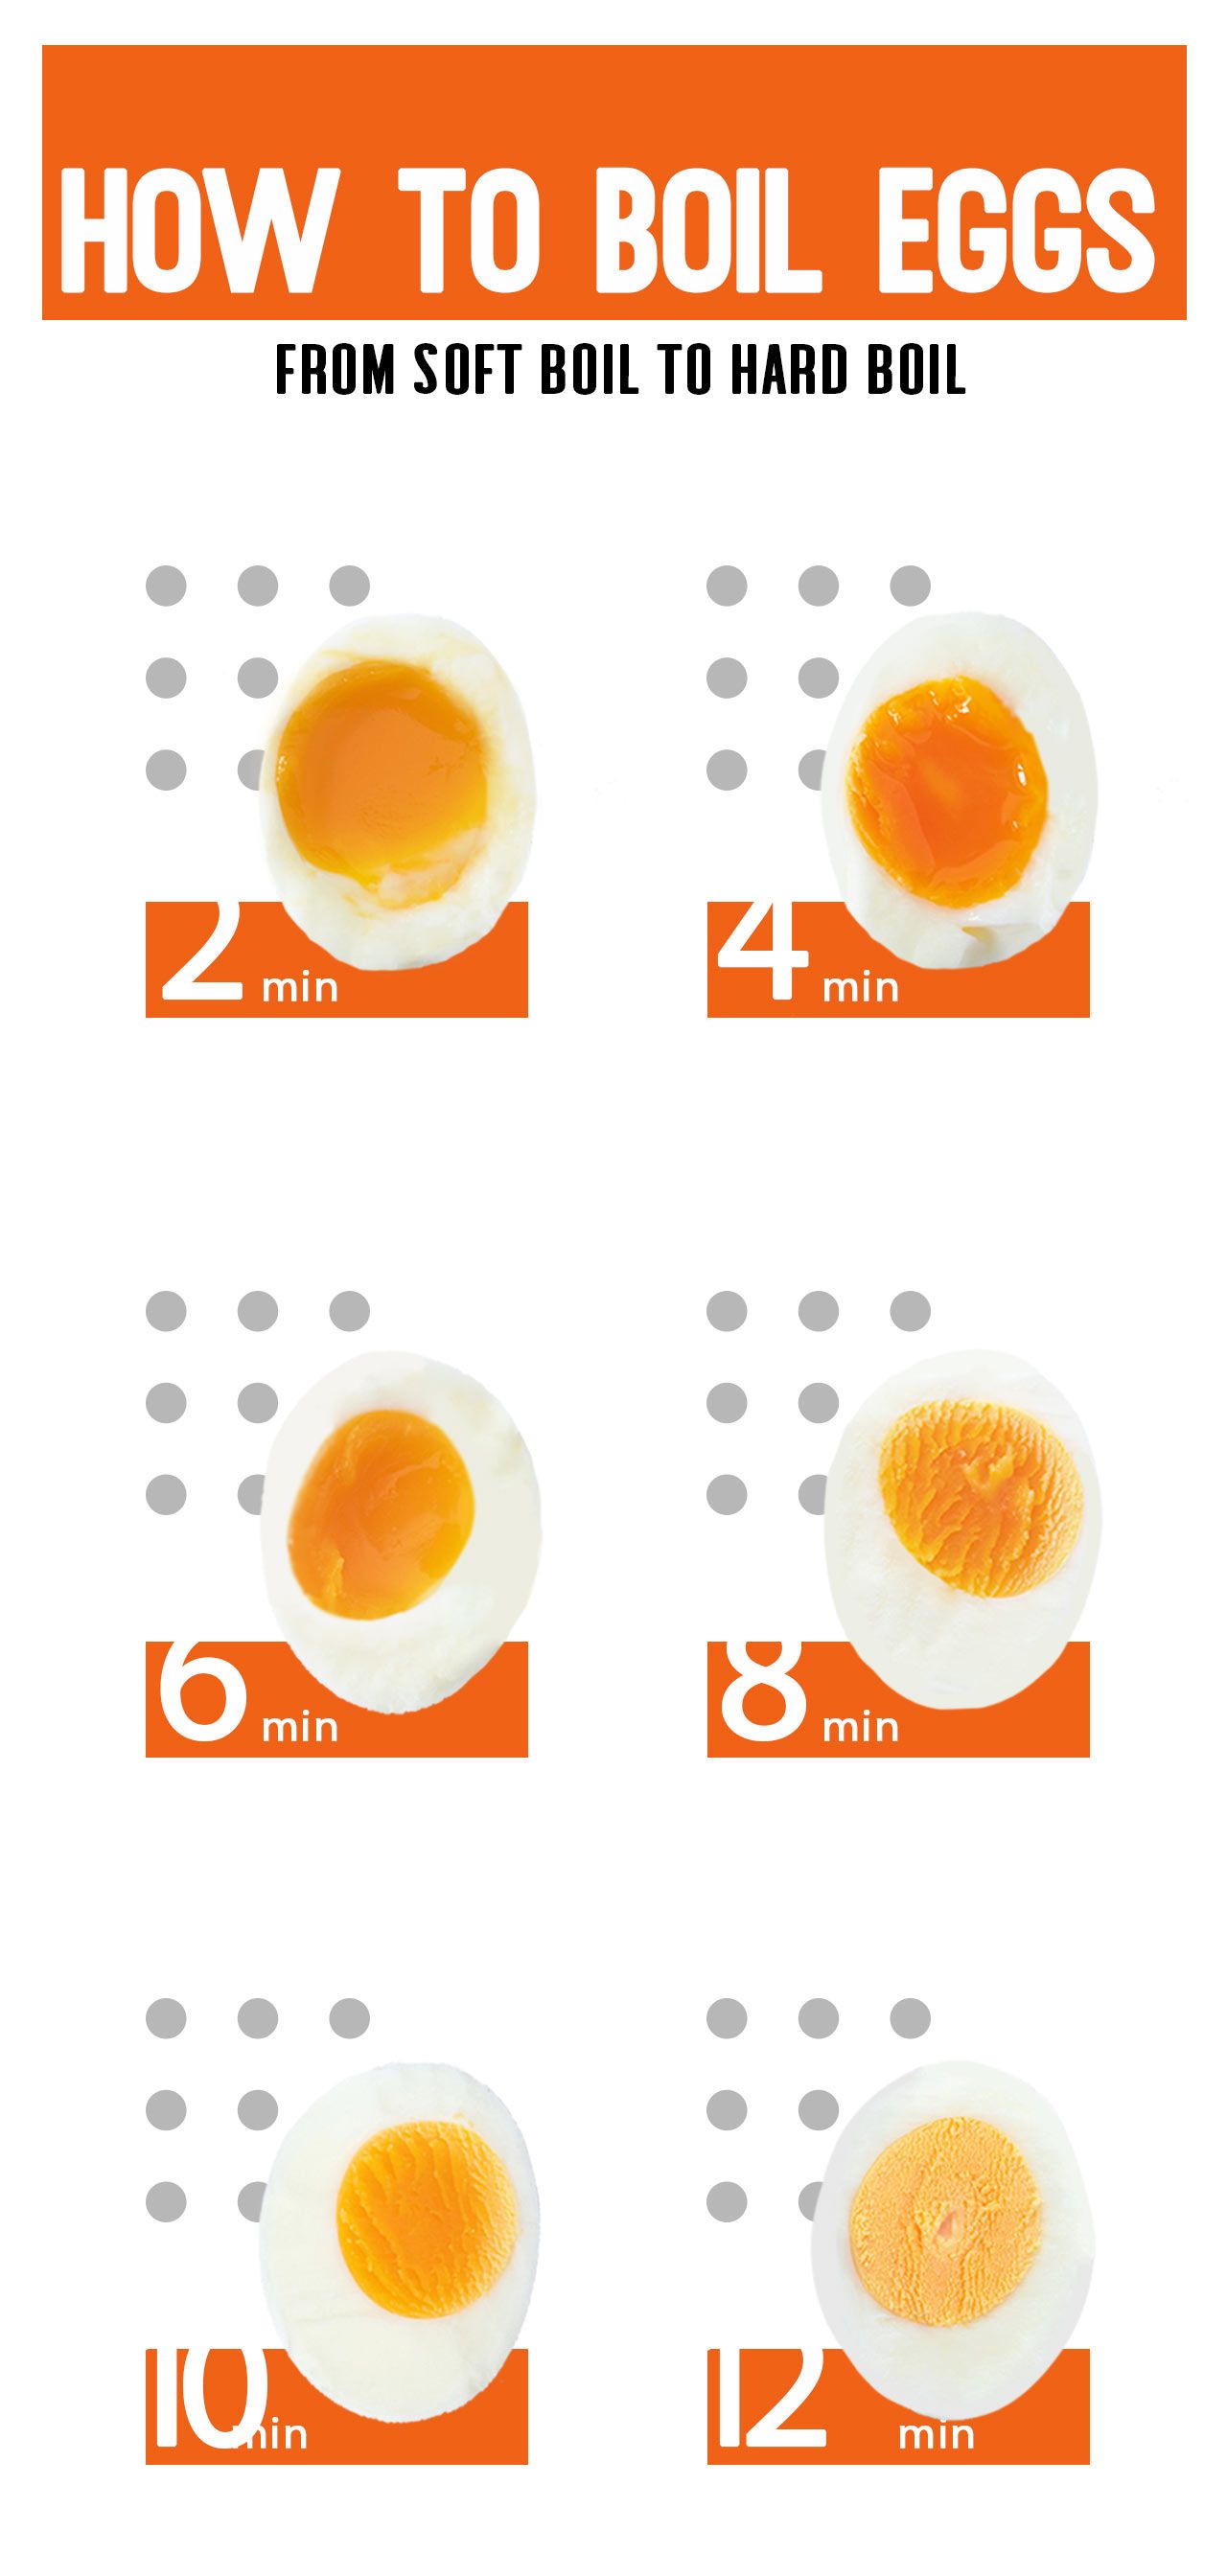 How to boil eggs: A simple guide to cook eggs to your liking